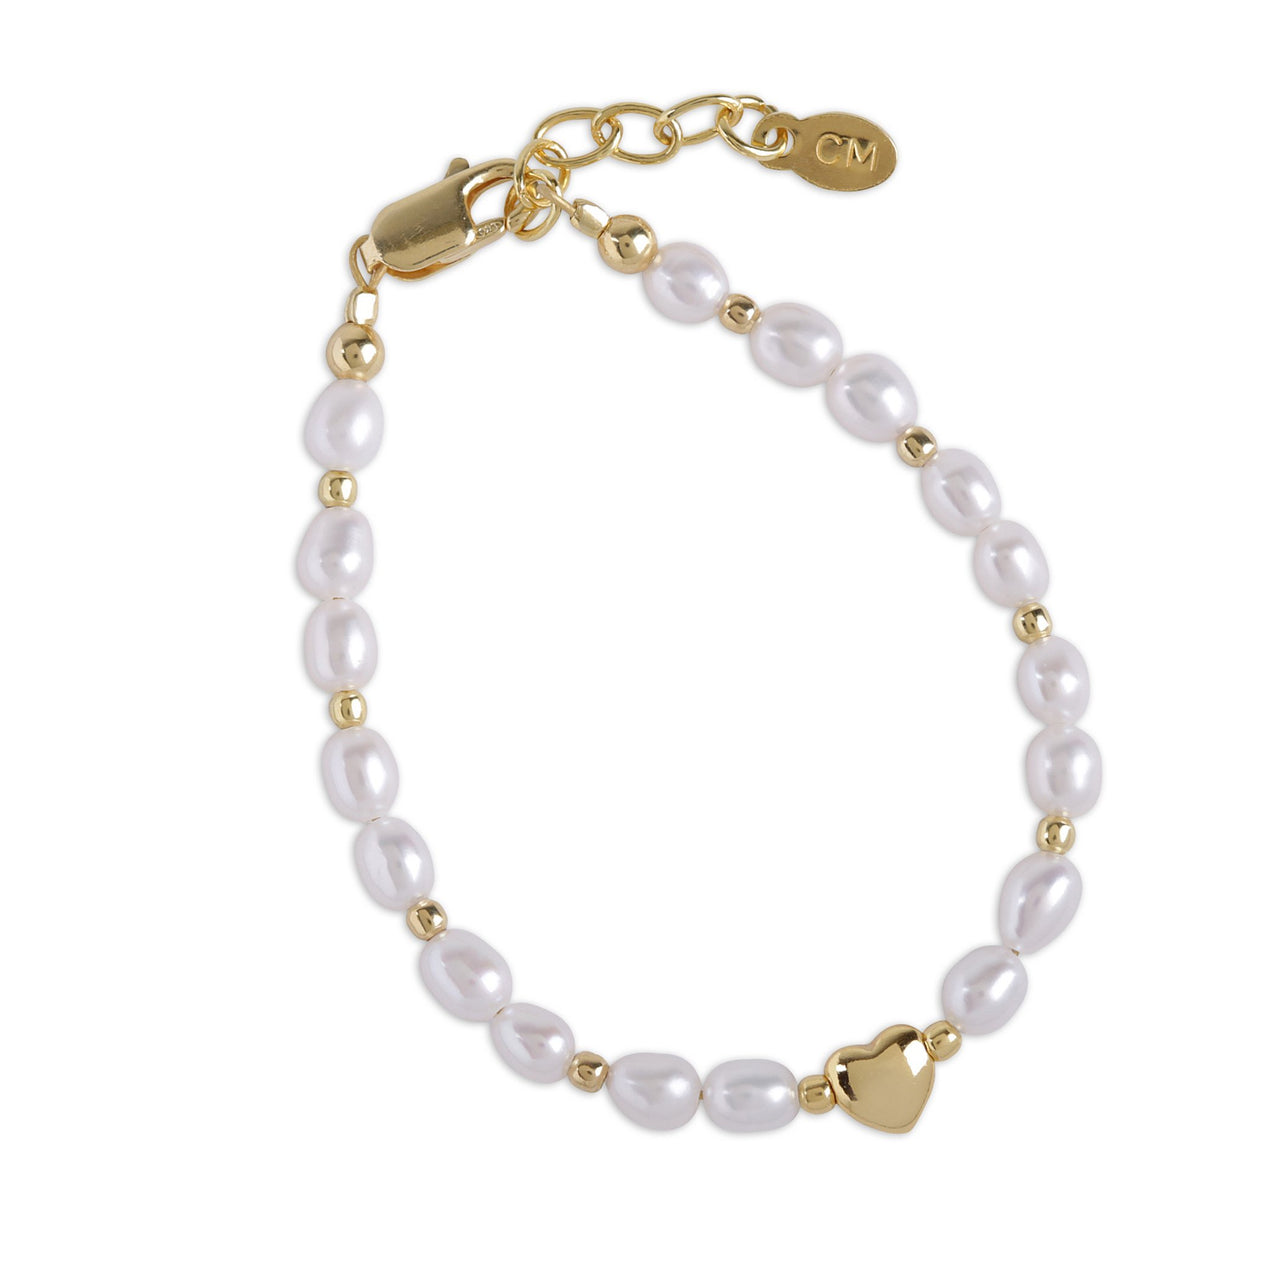 Cherished Moments Willow 14K Gold Plated Pearl Bracelet with Heart